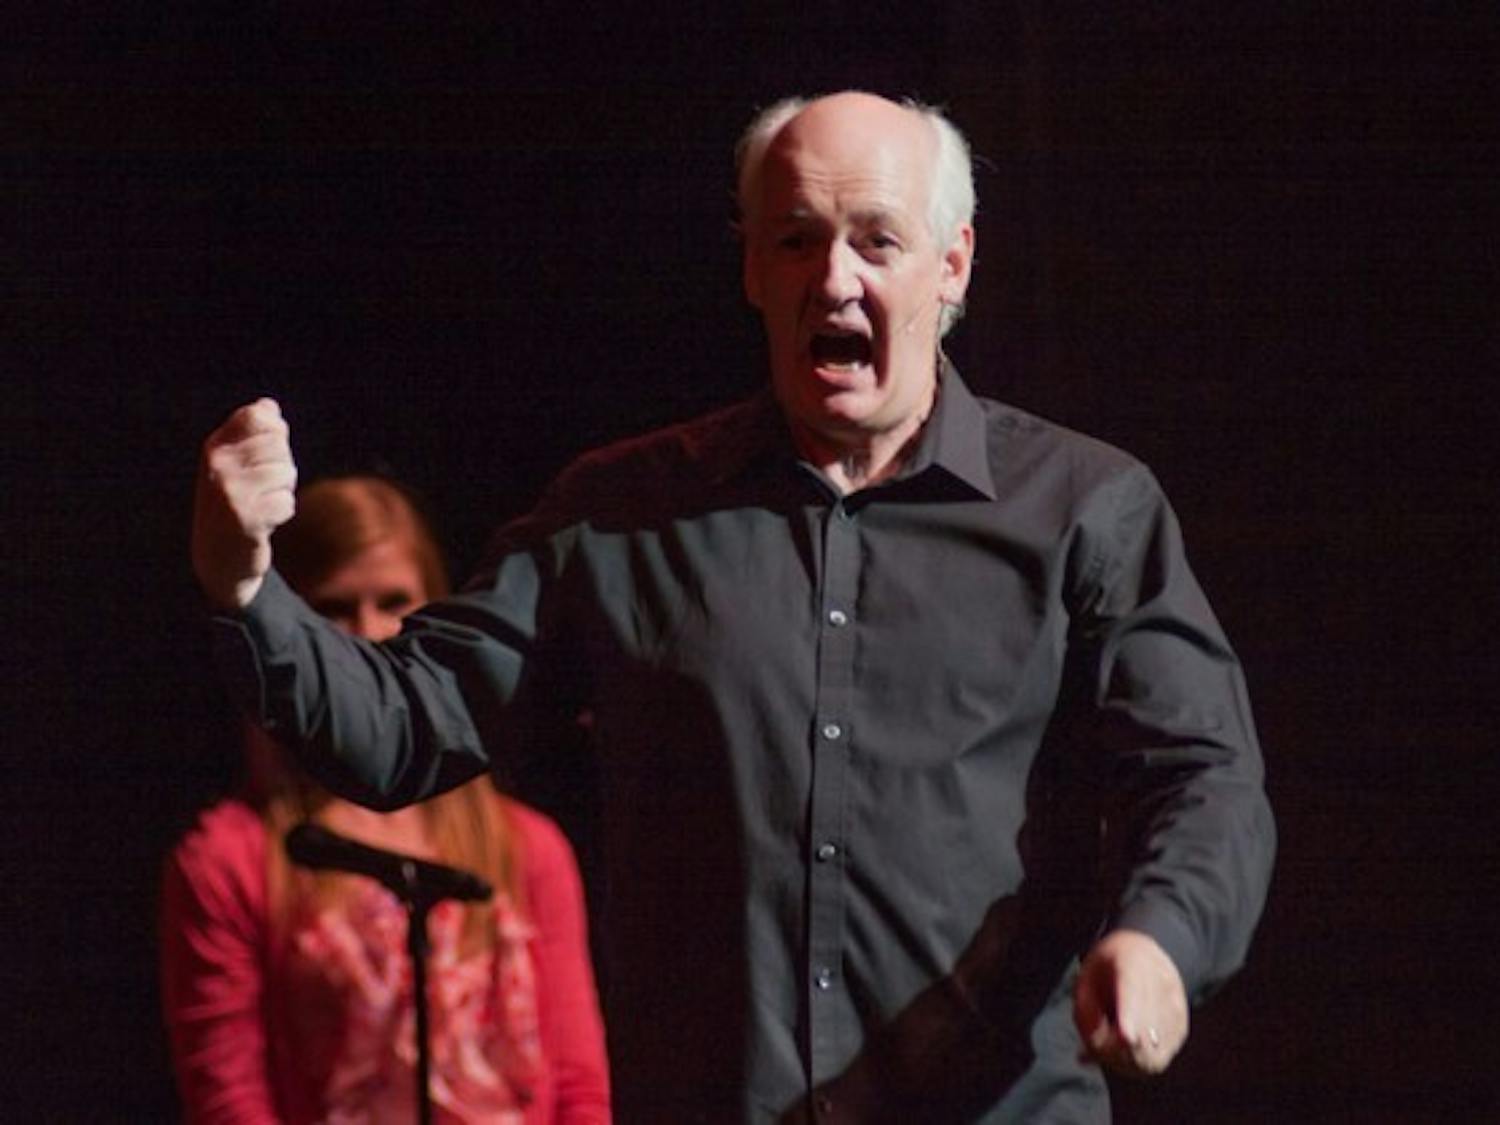 Colin Mochrie (above) and Brad Sherwood performed at UB Friday.&nbsp;The Spectrum&nbsp;had the opportunity to speak with them.
Jeff Scott, The Spectrum